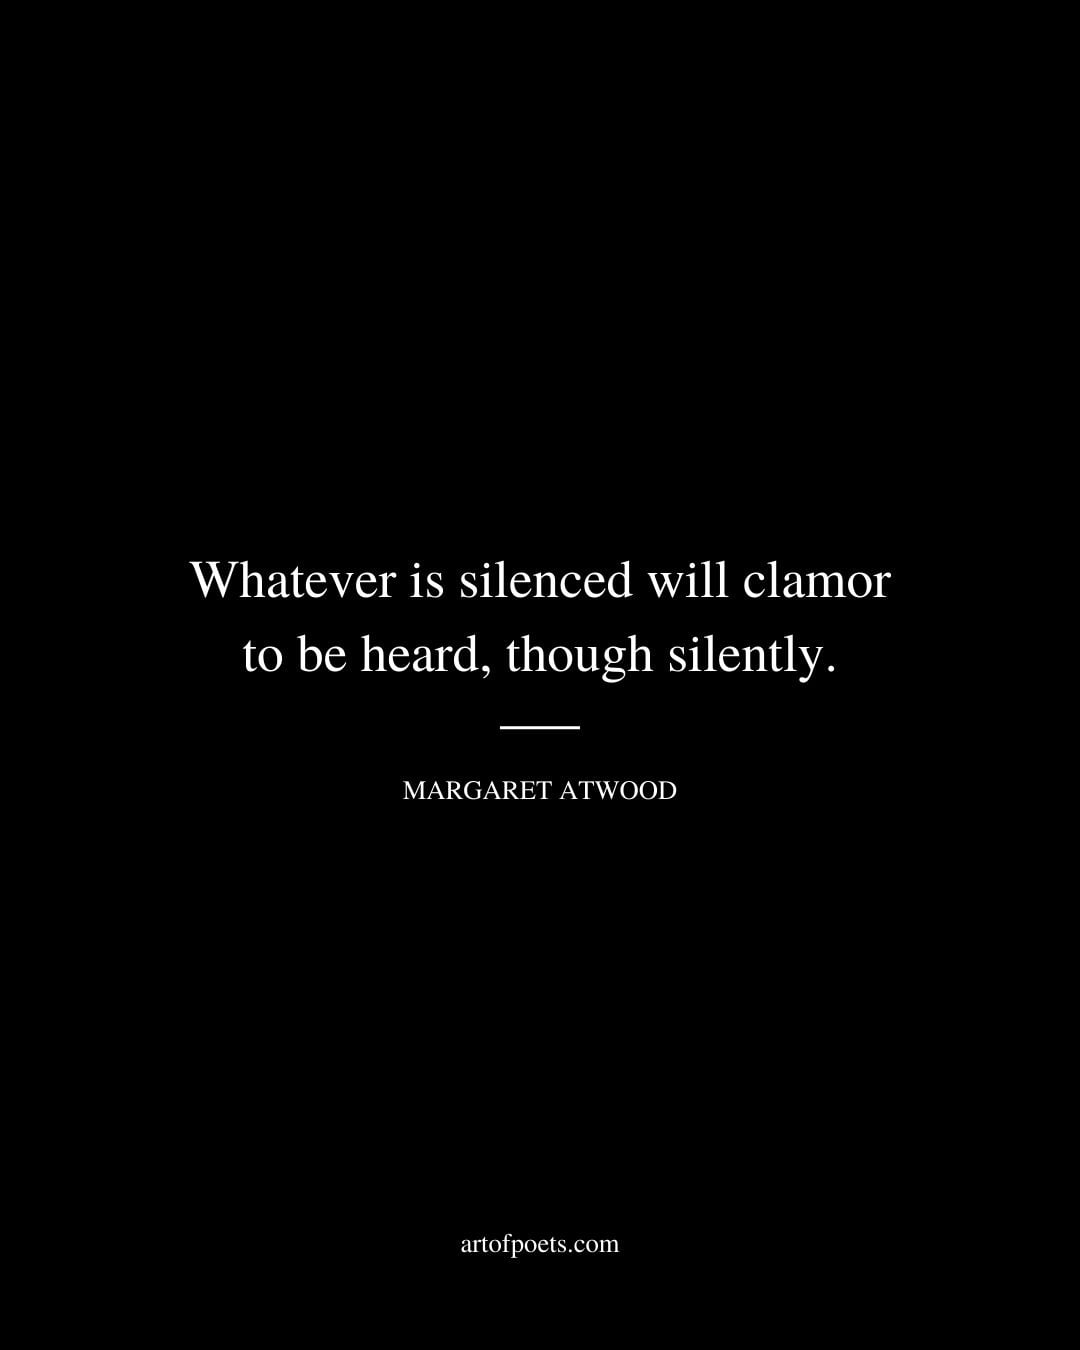 Whatever is silenced will clamor to be heard though silently. Margaret Atwood